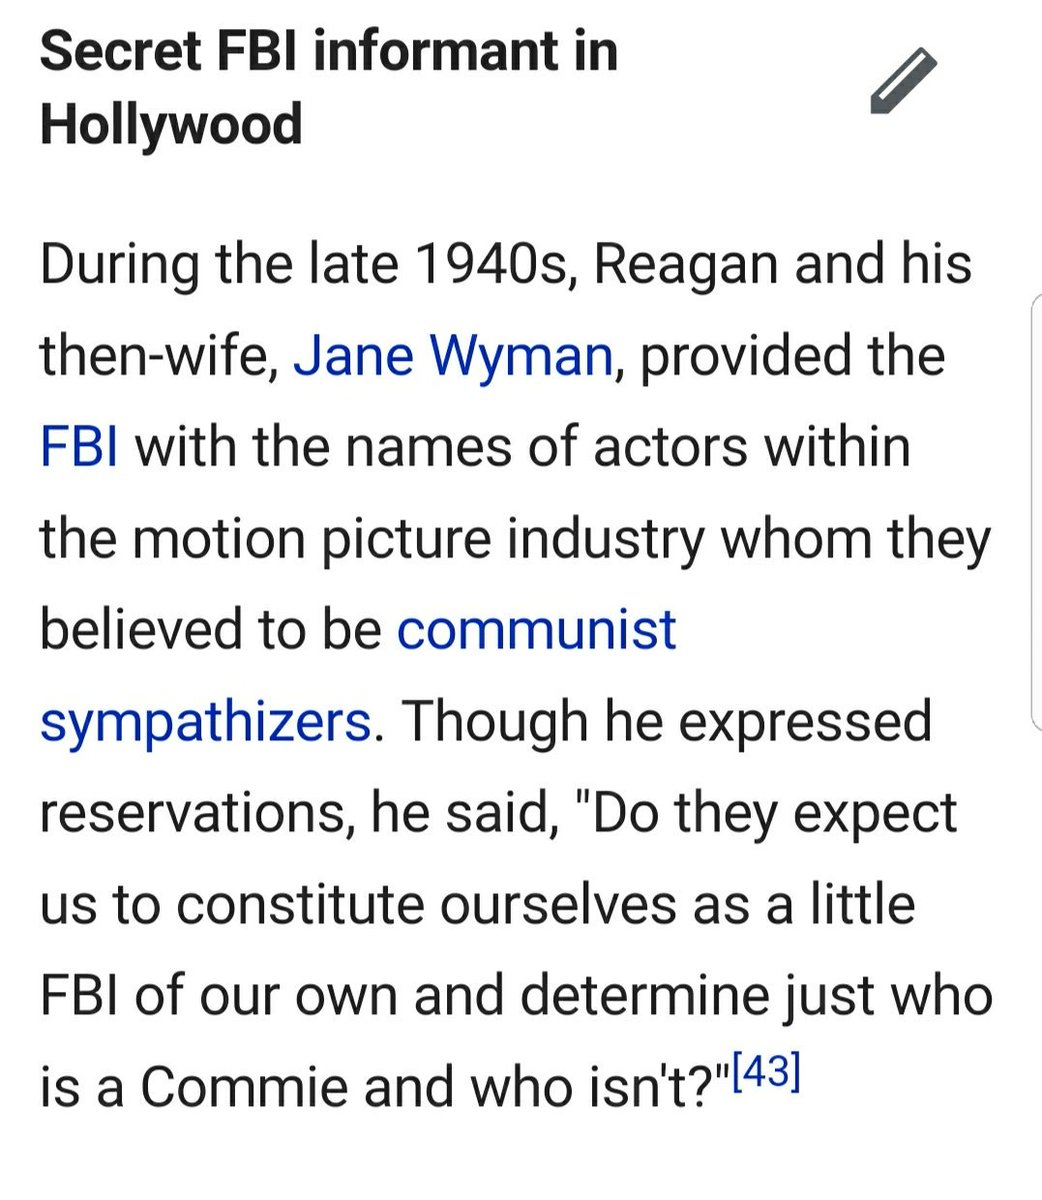 6.Even as an actor Reagan collaborated with the FBI and their witch-hunt against Hollywood.